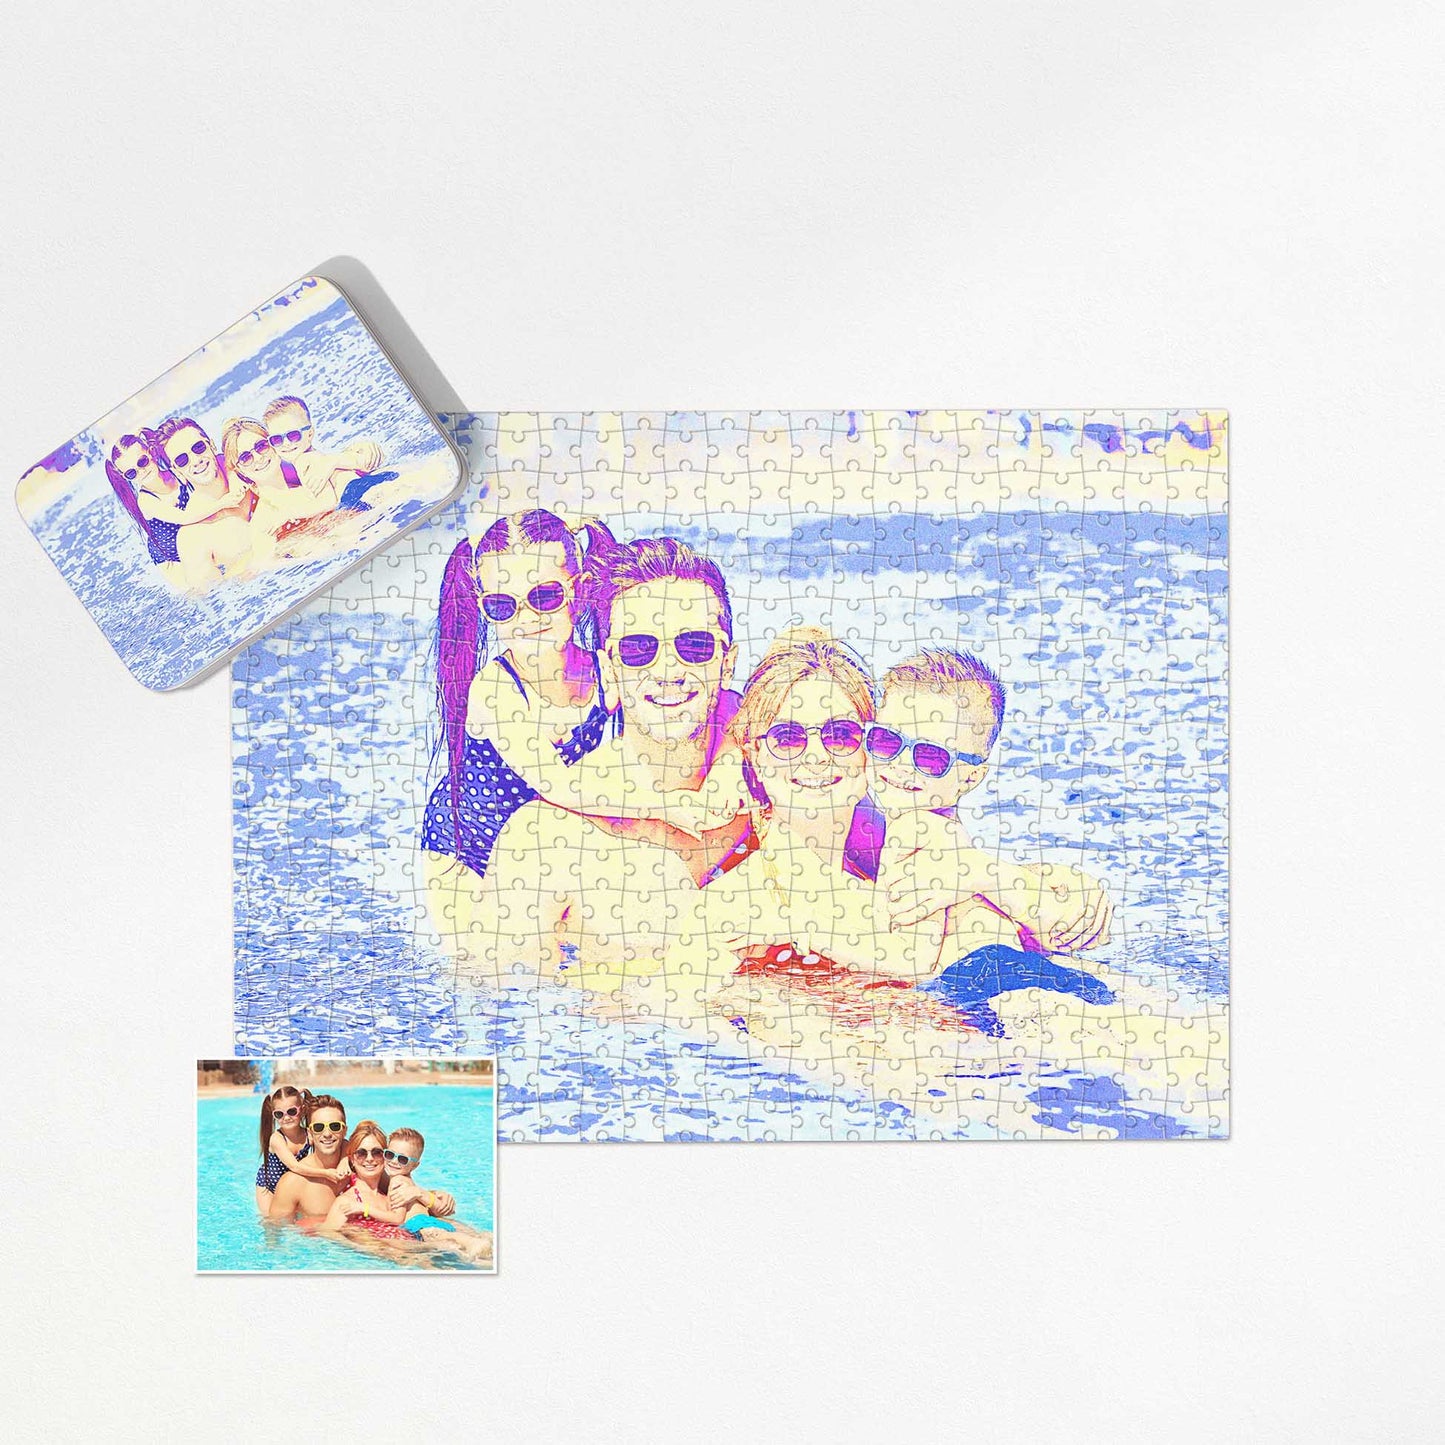 Looking for a unique and beautiful gift? Our Personalised Blue & Purple Jigsaw Puzzle, featuring fresh and cheerful blue hues, is sure to inspire and delight! Print from photo